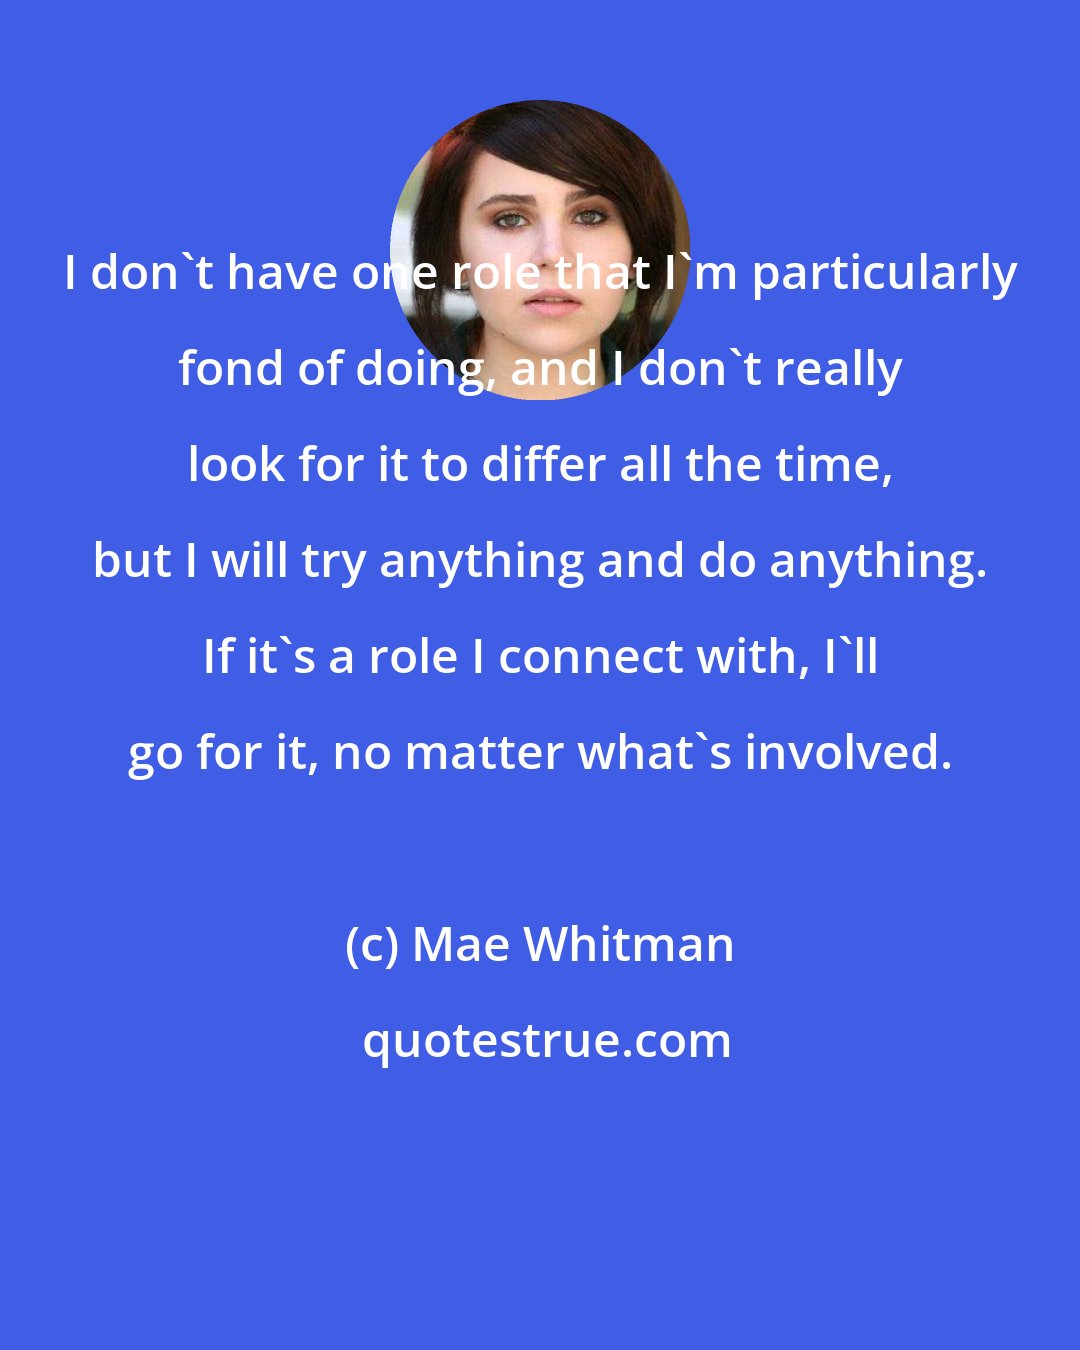 Mae Whitman: I don't have one role that I'm particularly fond of doing, and I don't really look for it to differ all the time, but I will try anything and do anything. If it's a role I connect with, I'll go for it, no matter what's involved.